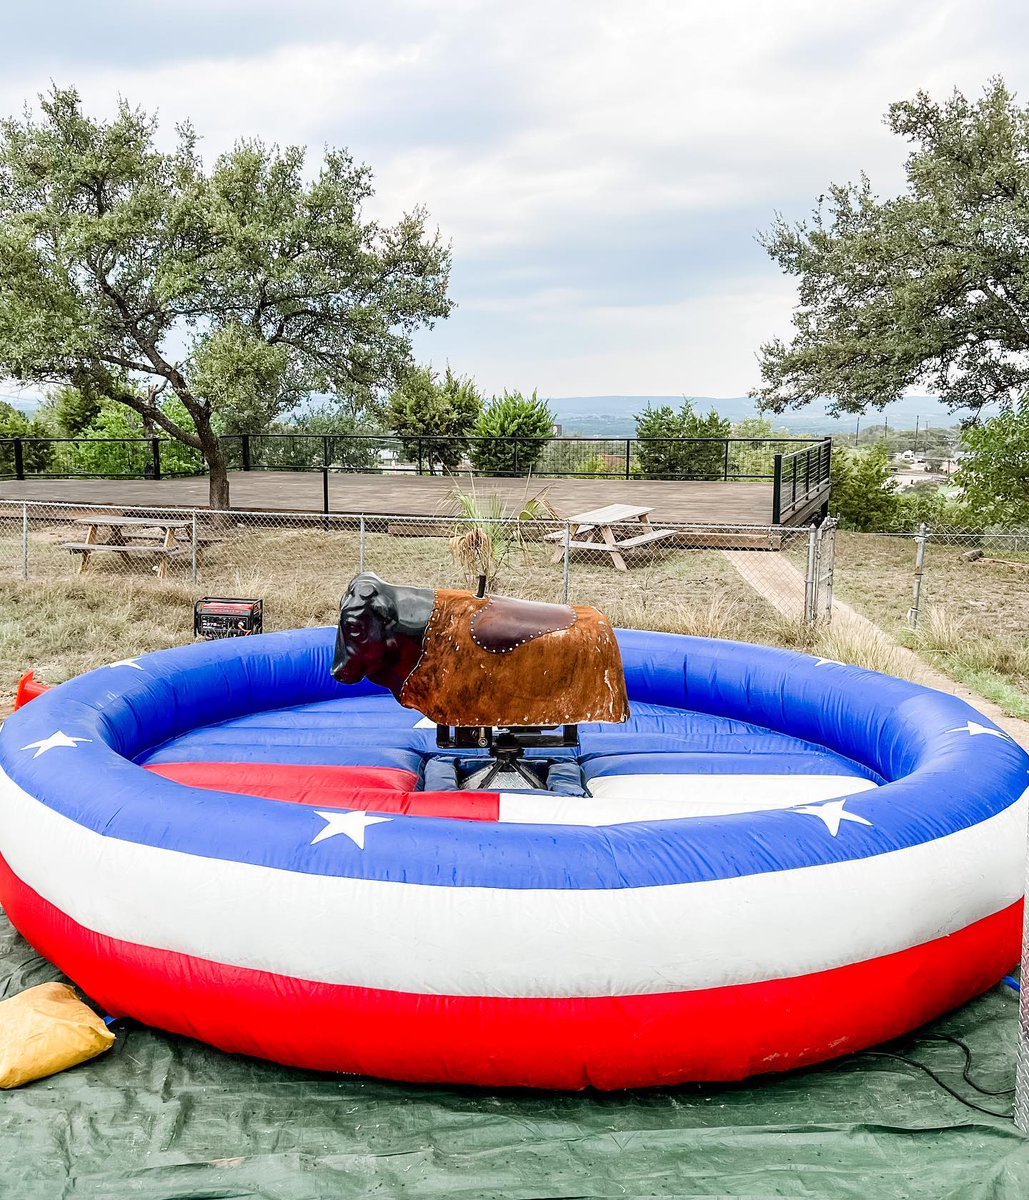 Elevate your event with Sundance Events! 🎉 From stunning tent rentals to thrilling mechanical bull rides, we've got everything you need to make your party unforgettable. Contact us today and let's start planning the celebration of your dreams!

#SundanceEvents #PartyRentals #Tex